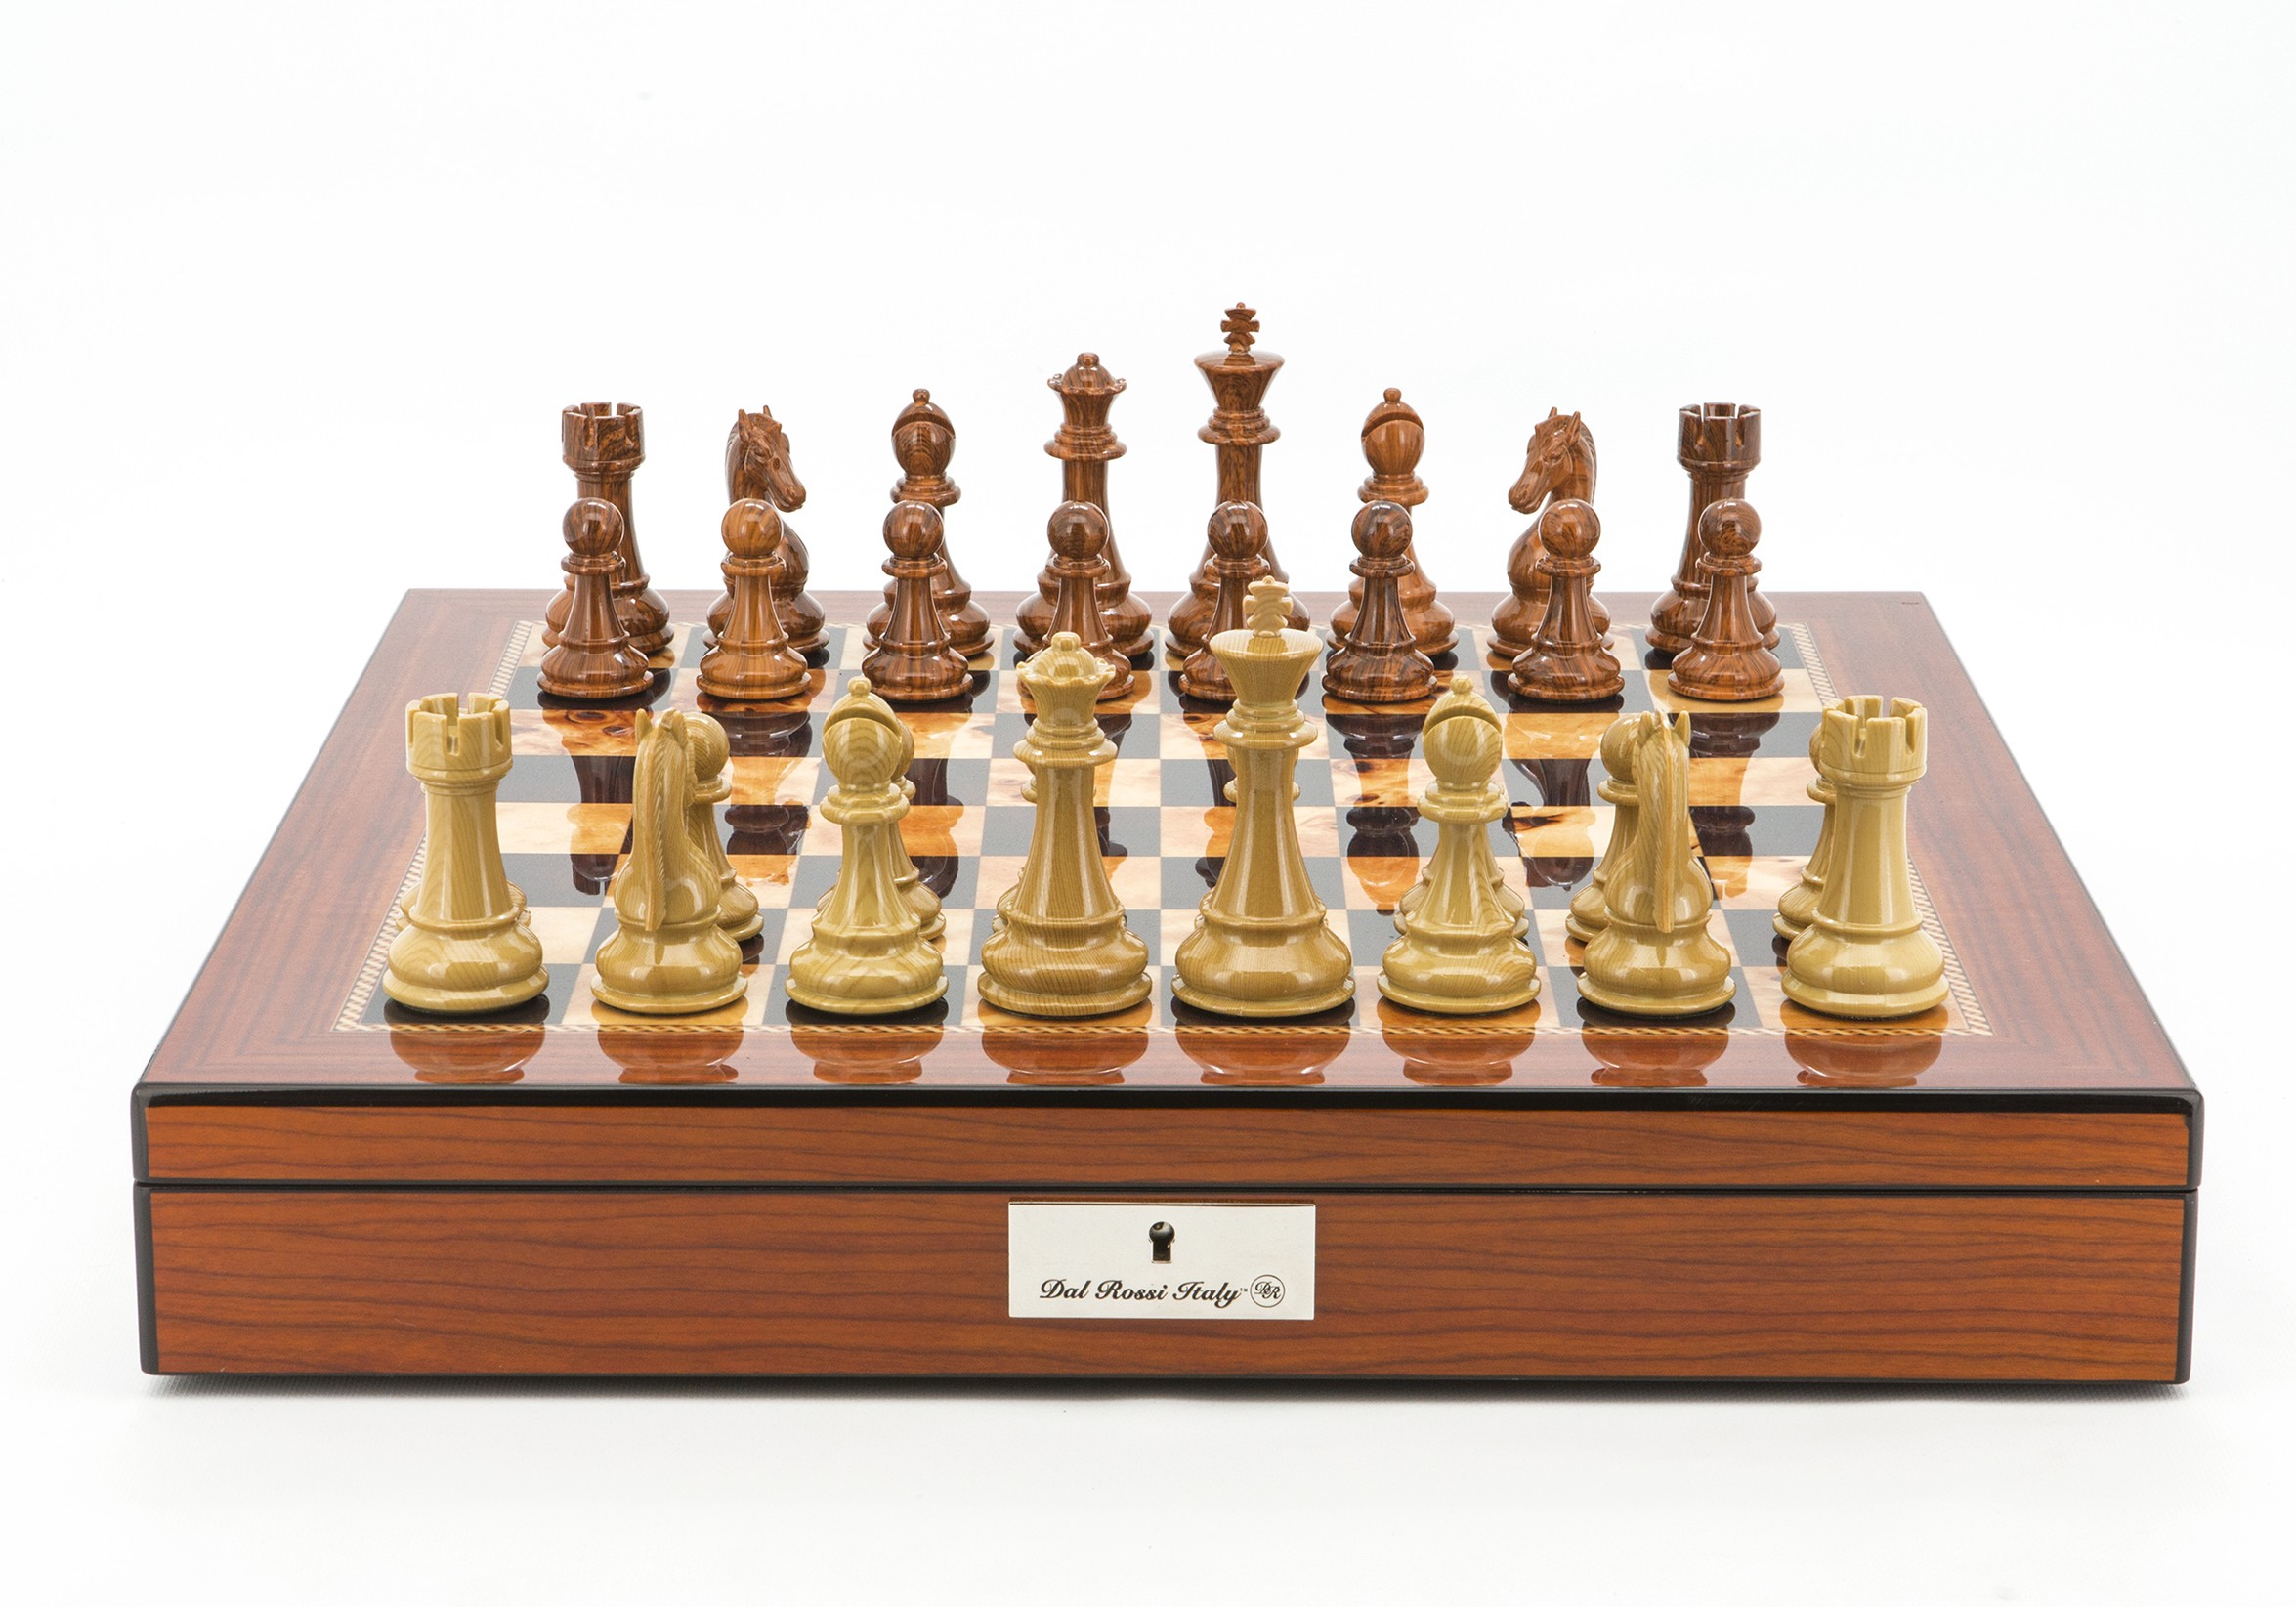 Dal Rossi Italy Chess Set Walnut Shinny Finish 20″ With Compartments, Brown and Box Wood Grain Finish 110mm Chess Pieces